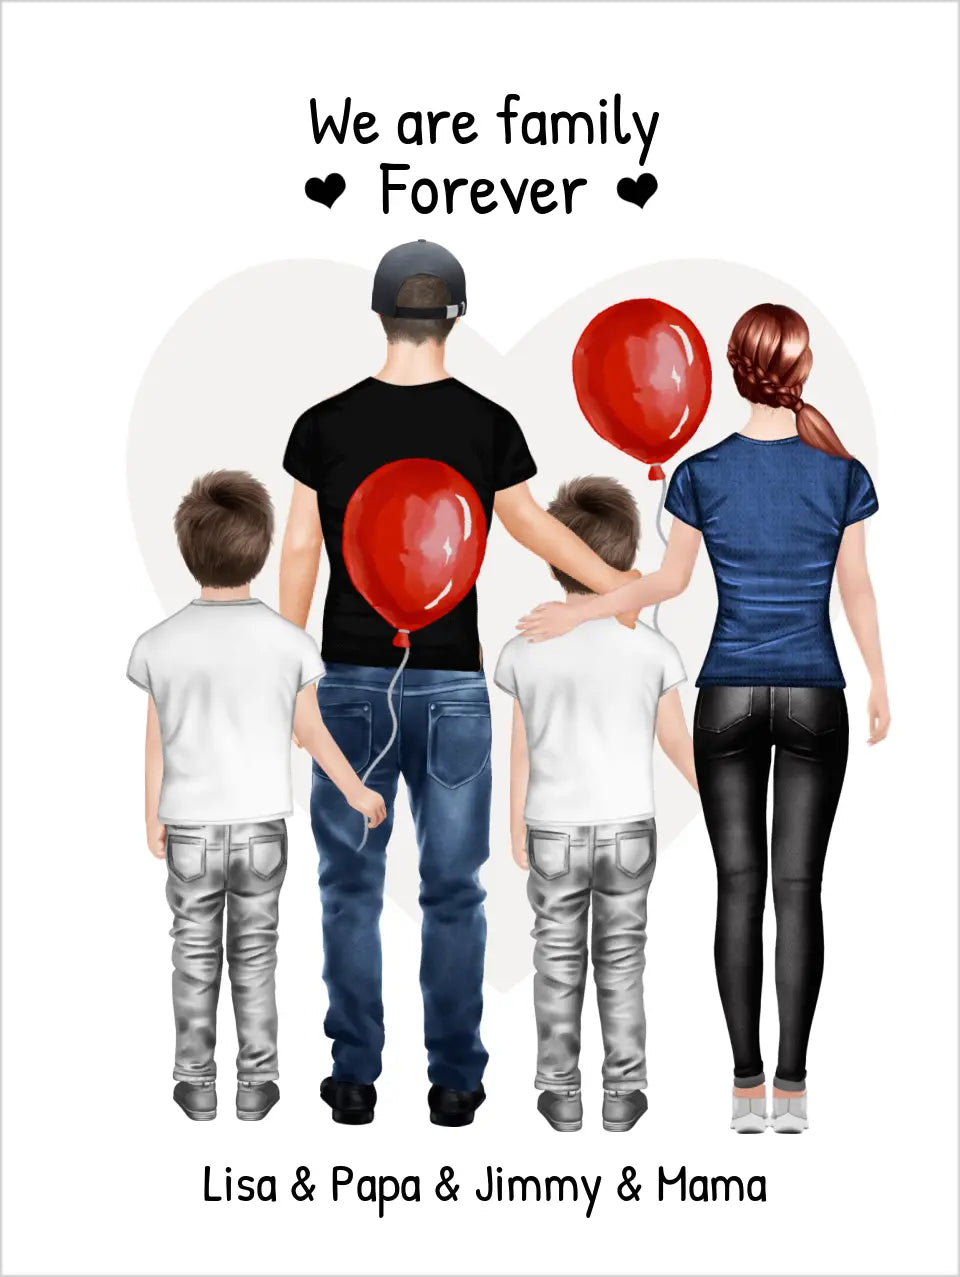 Personalisiertes Poster Familie mit 2 Kindern - Familienbild mit 2 Kindern - Personalisiertes Familienportrait - We are family